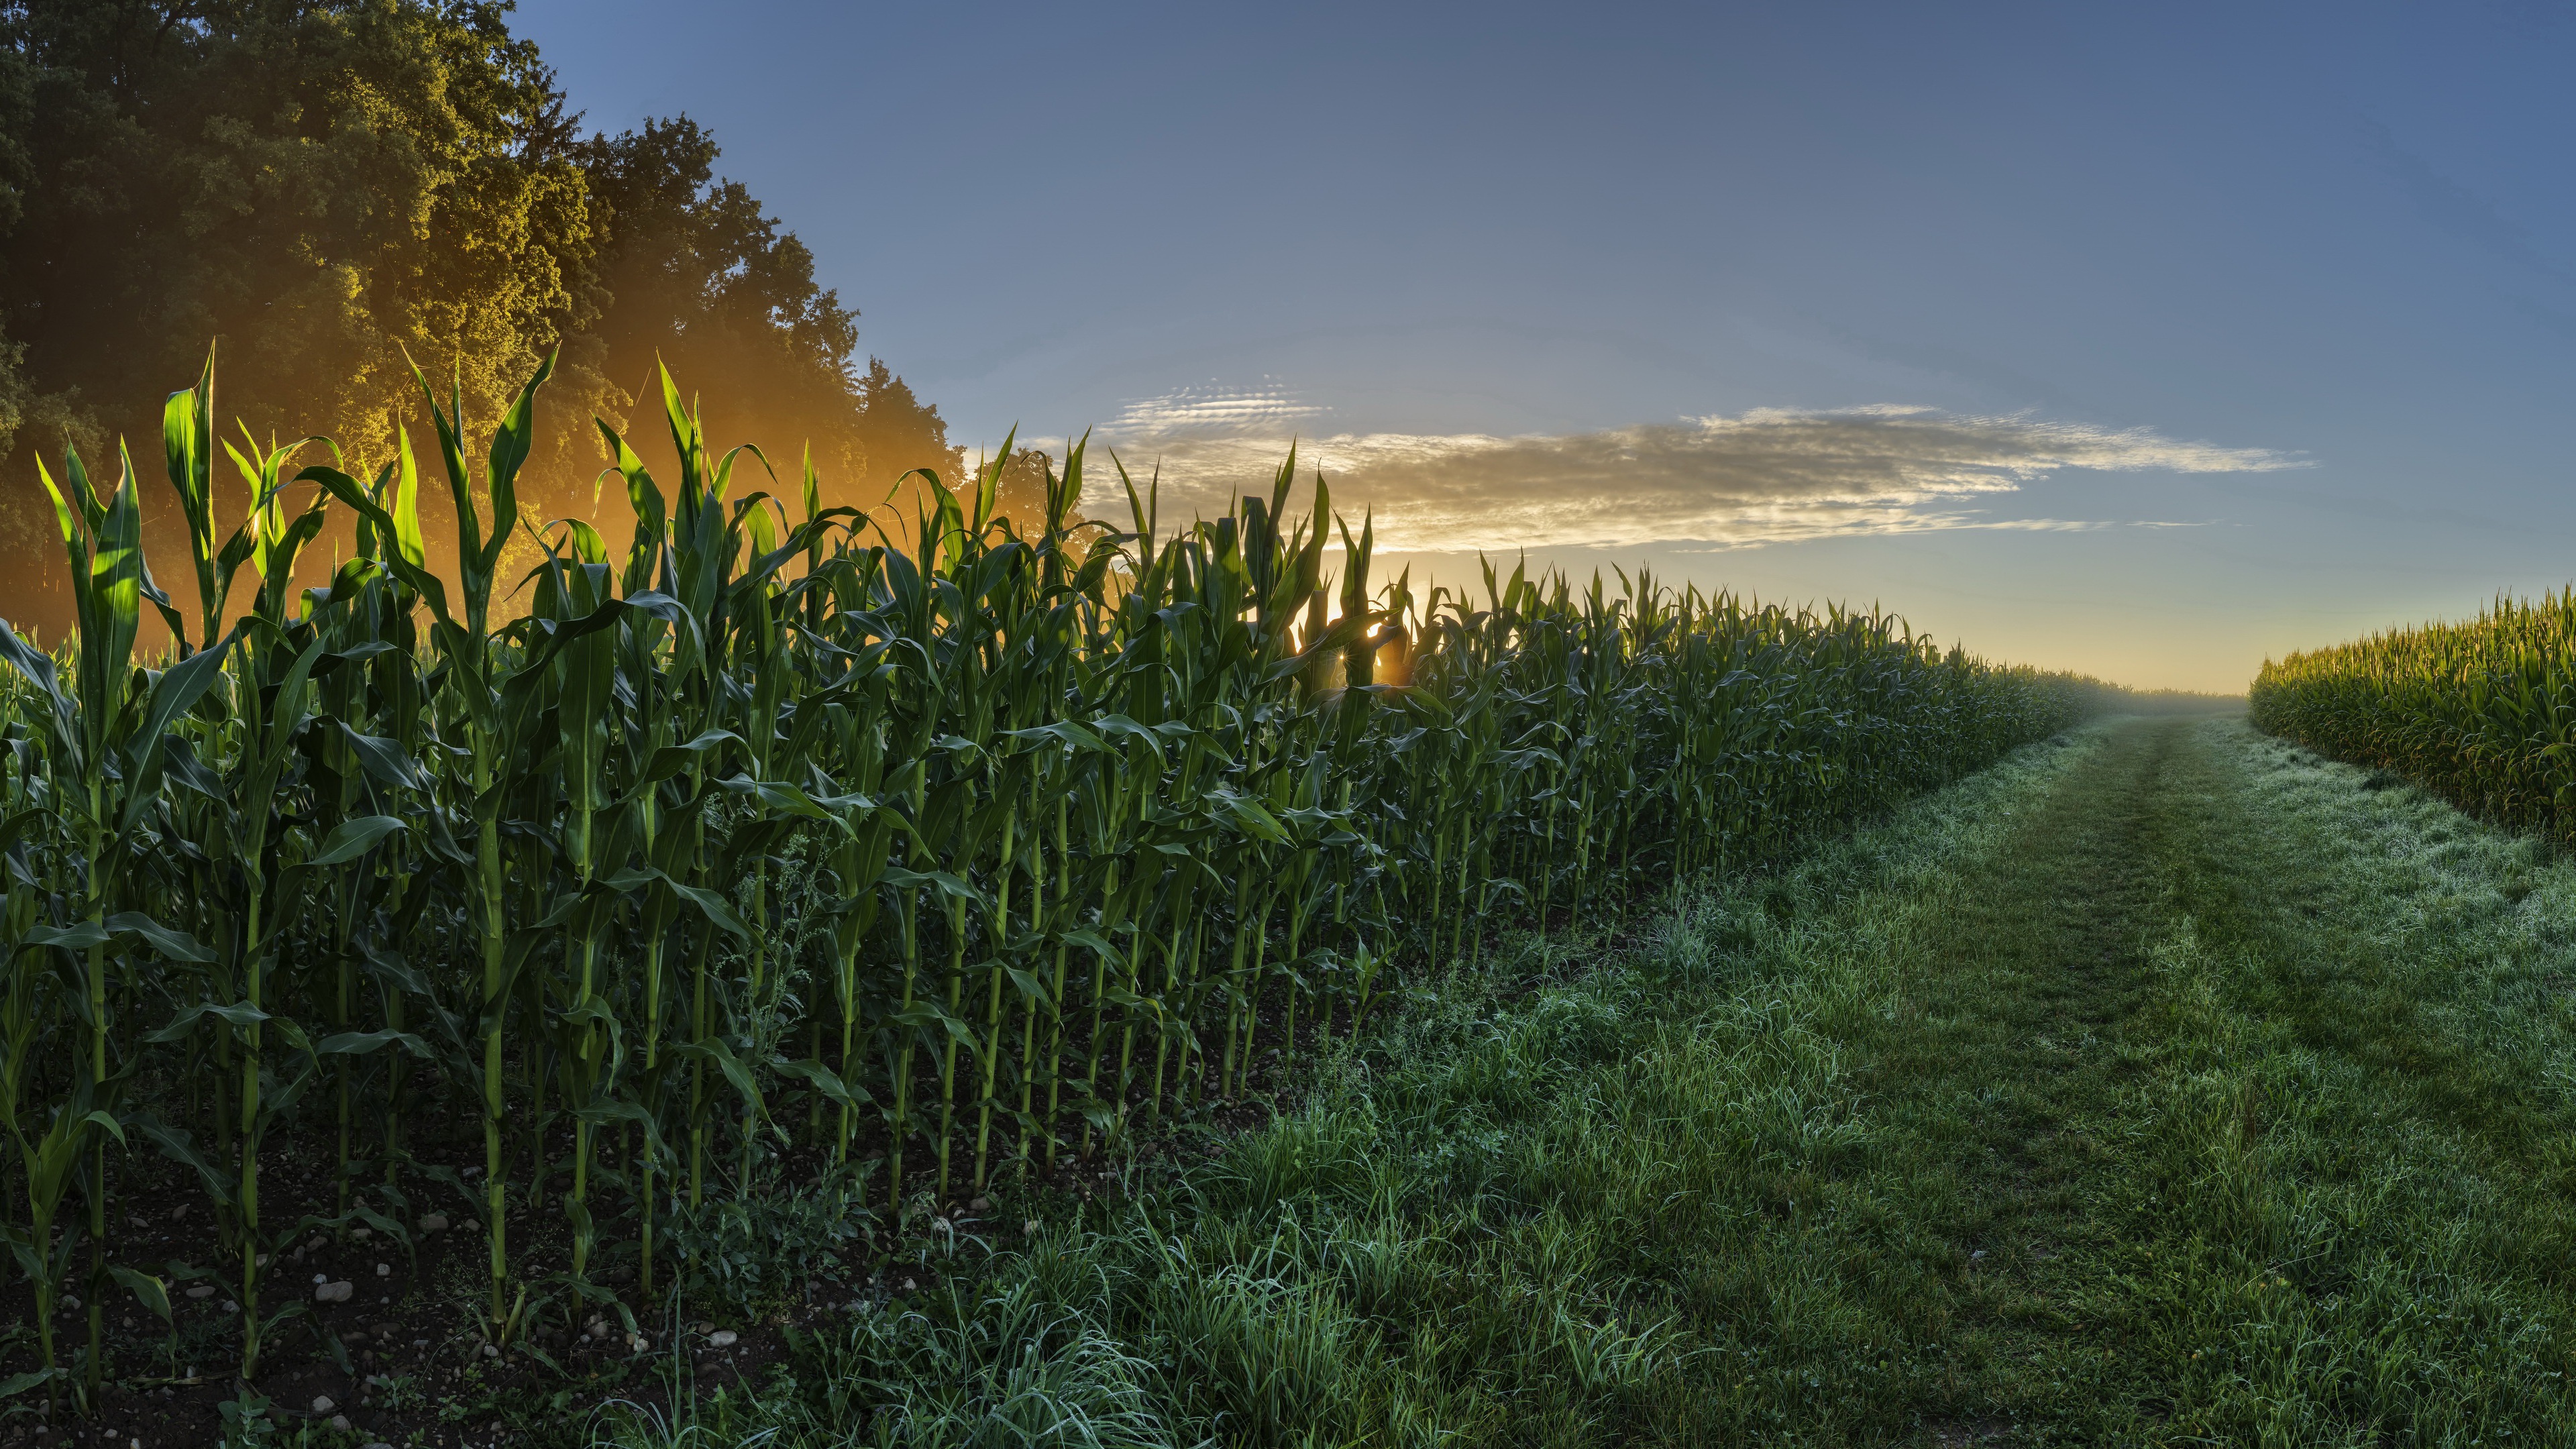 750 Corn Field Pictures HD  Download Free Images on Unsplash